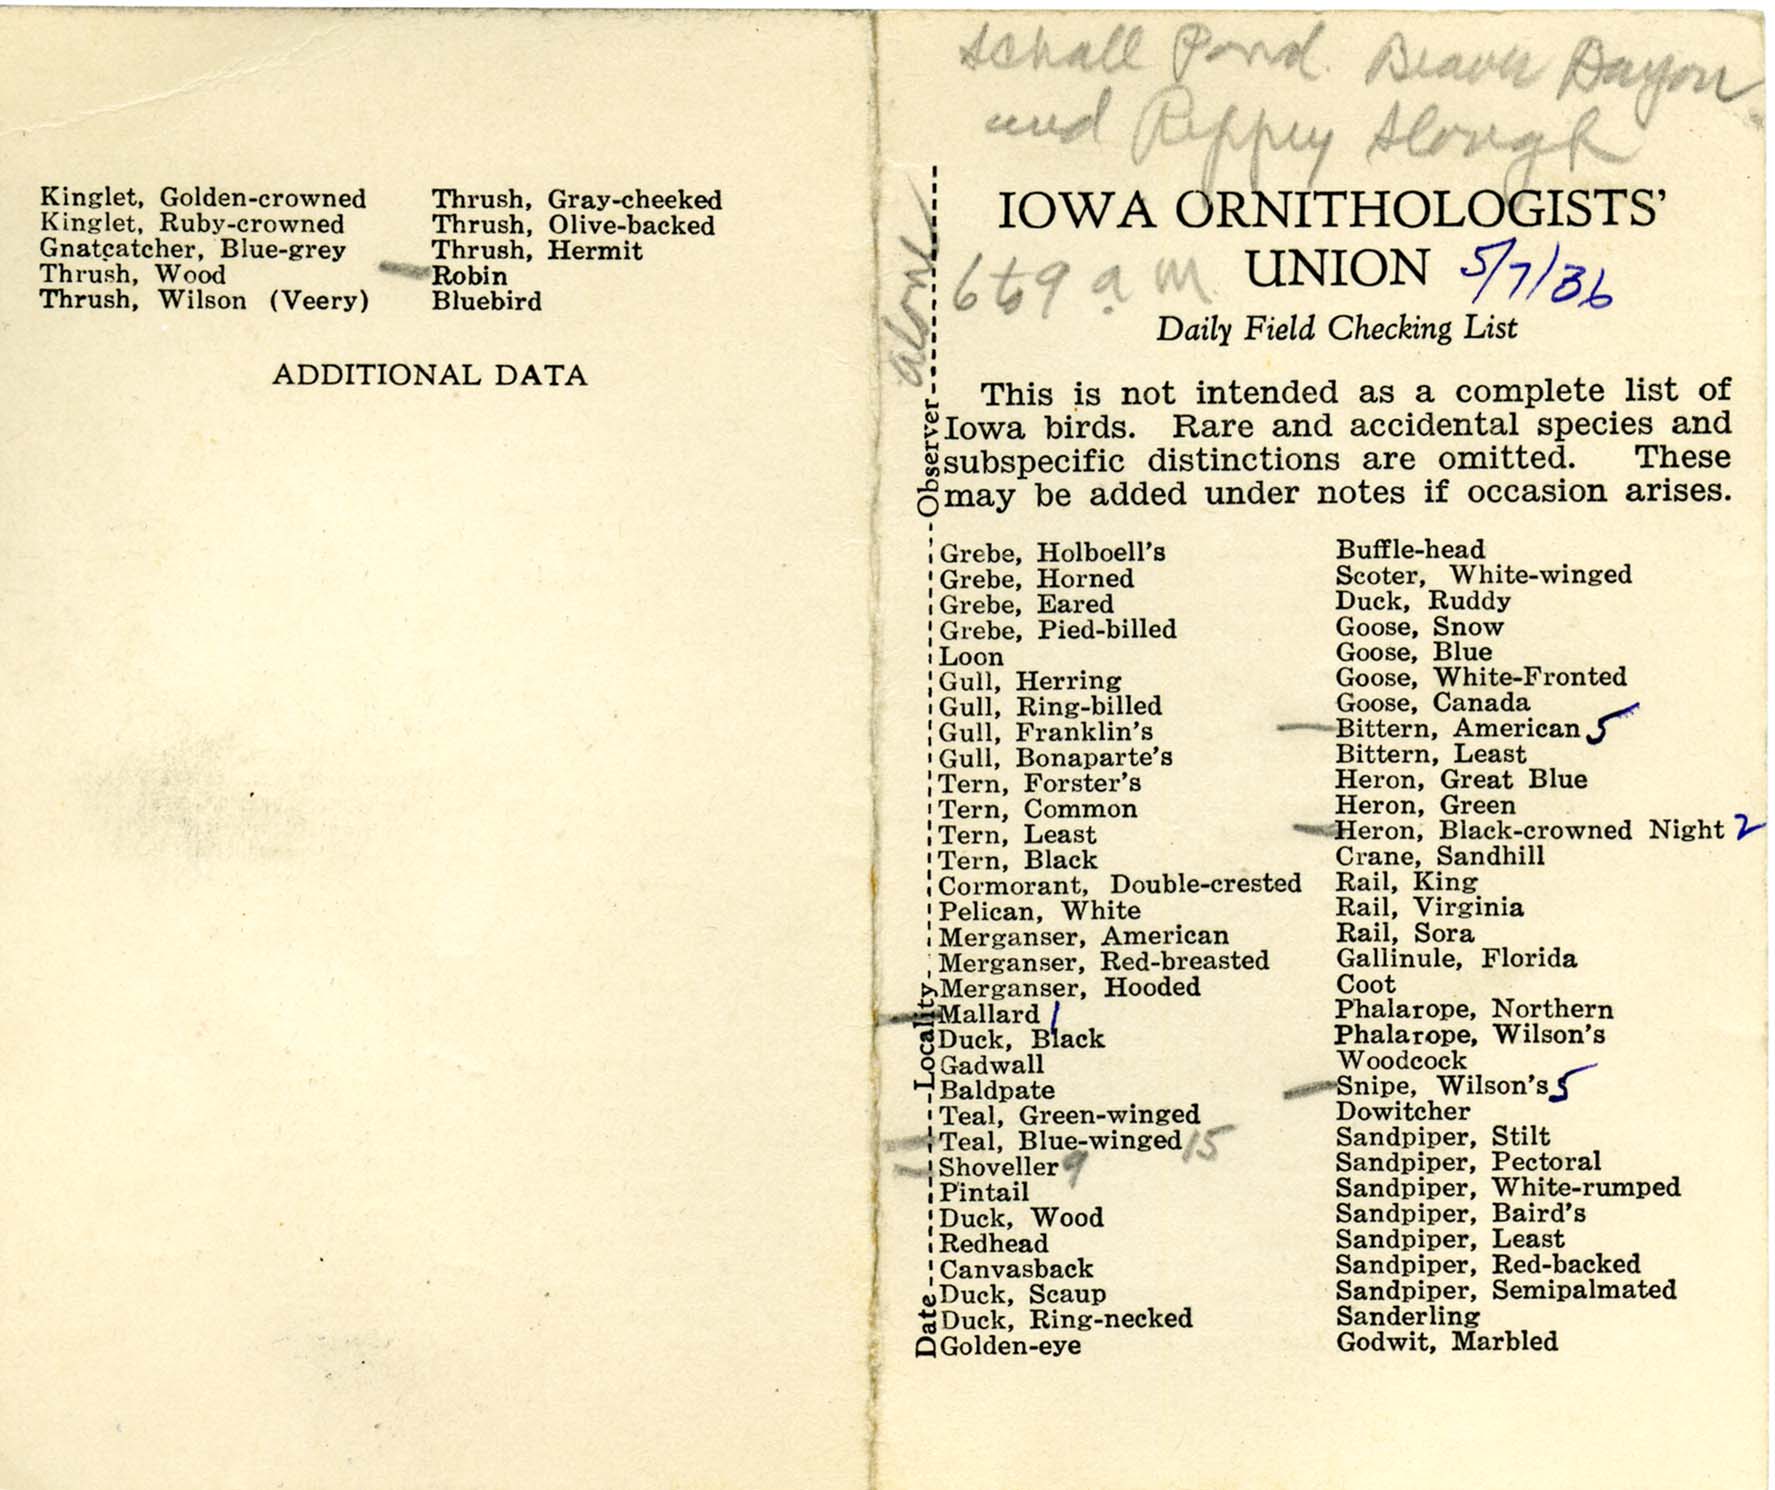 Daily field checking list by Walter Rosene, May 7, 1936